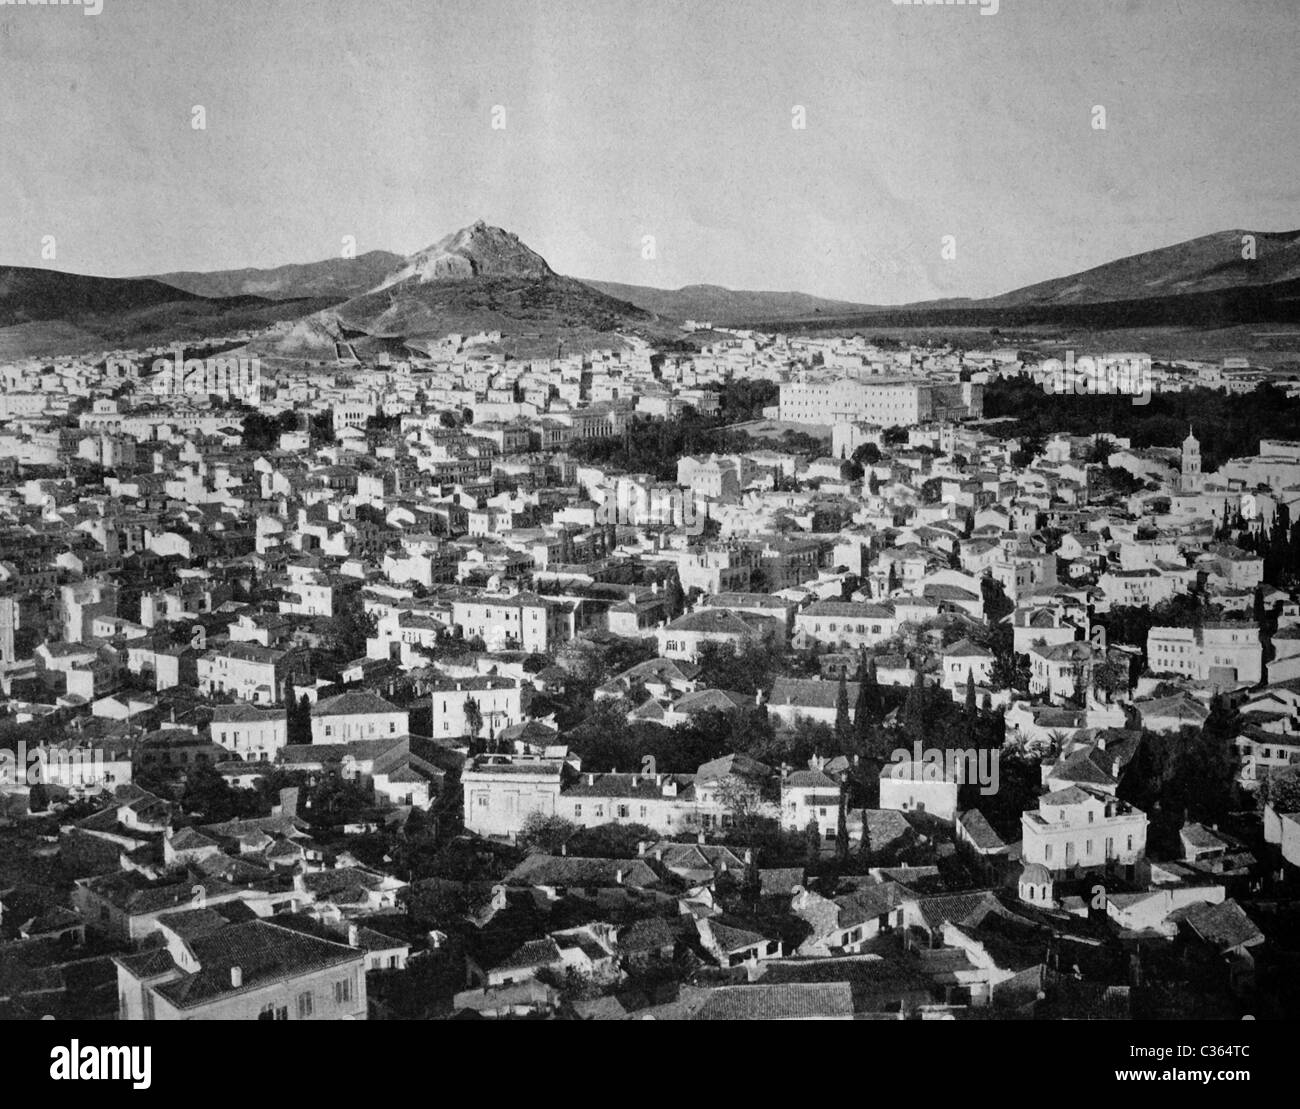 One of the first autotypes of Athens, seen from the Acropolis, Greece, historical photograph, 1884 Stock Photo